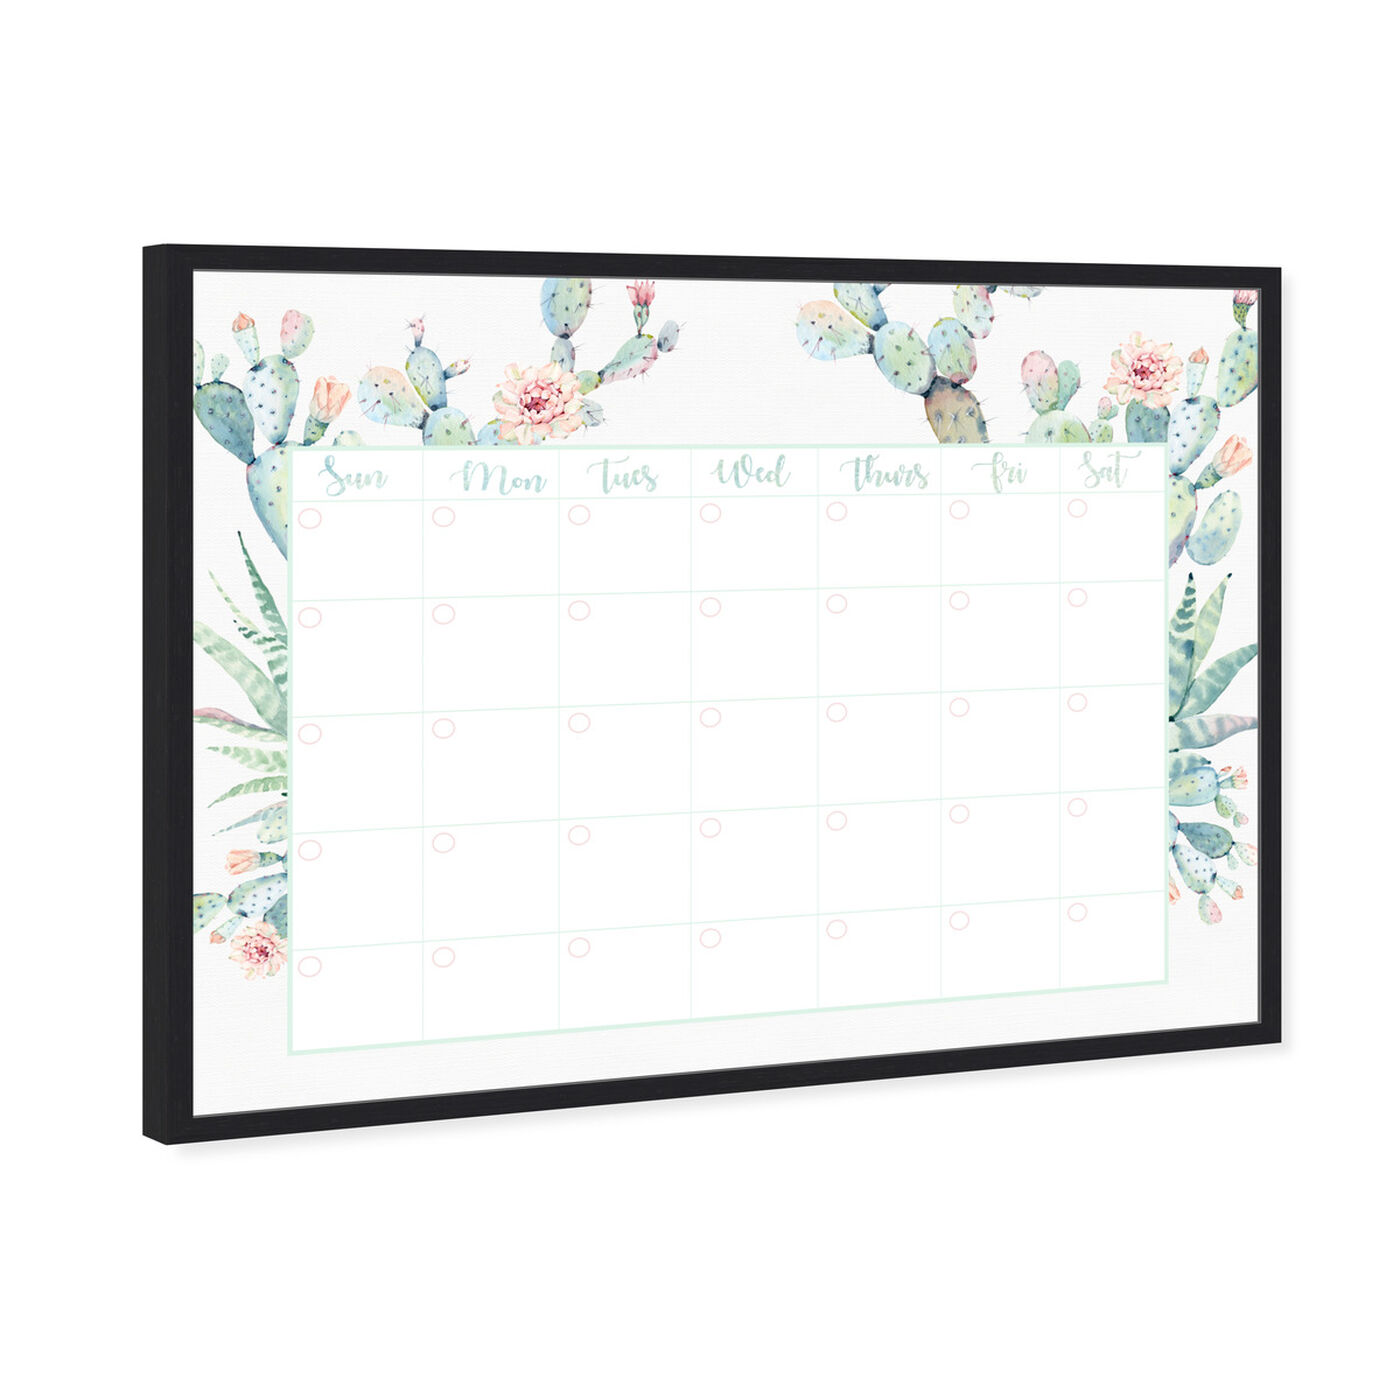 Angled view of Cactus Monthly Calendar featuring education and office and whiteboards art.